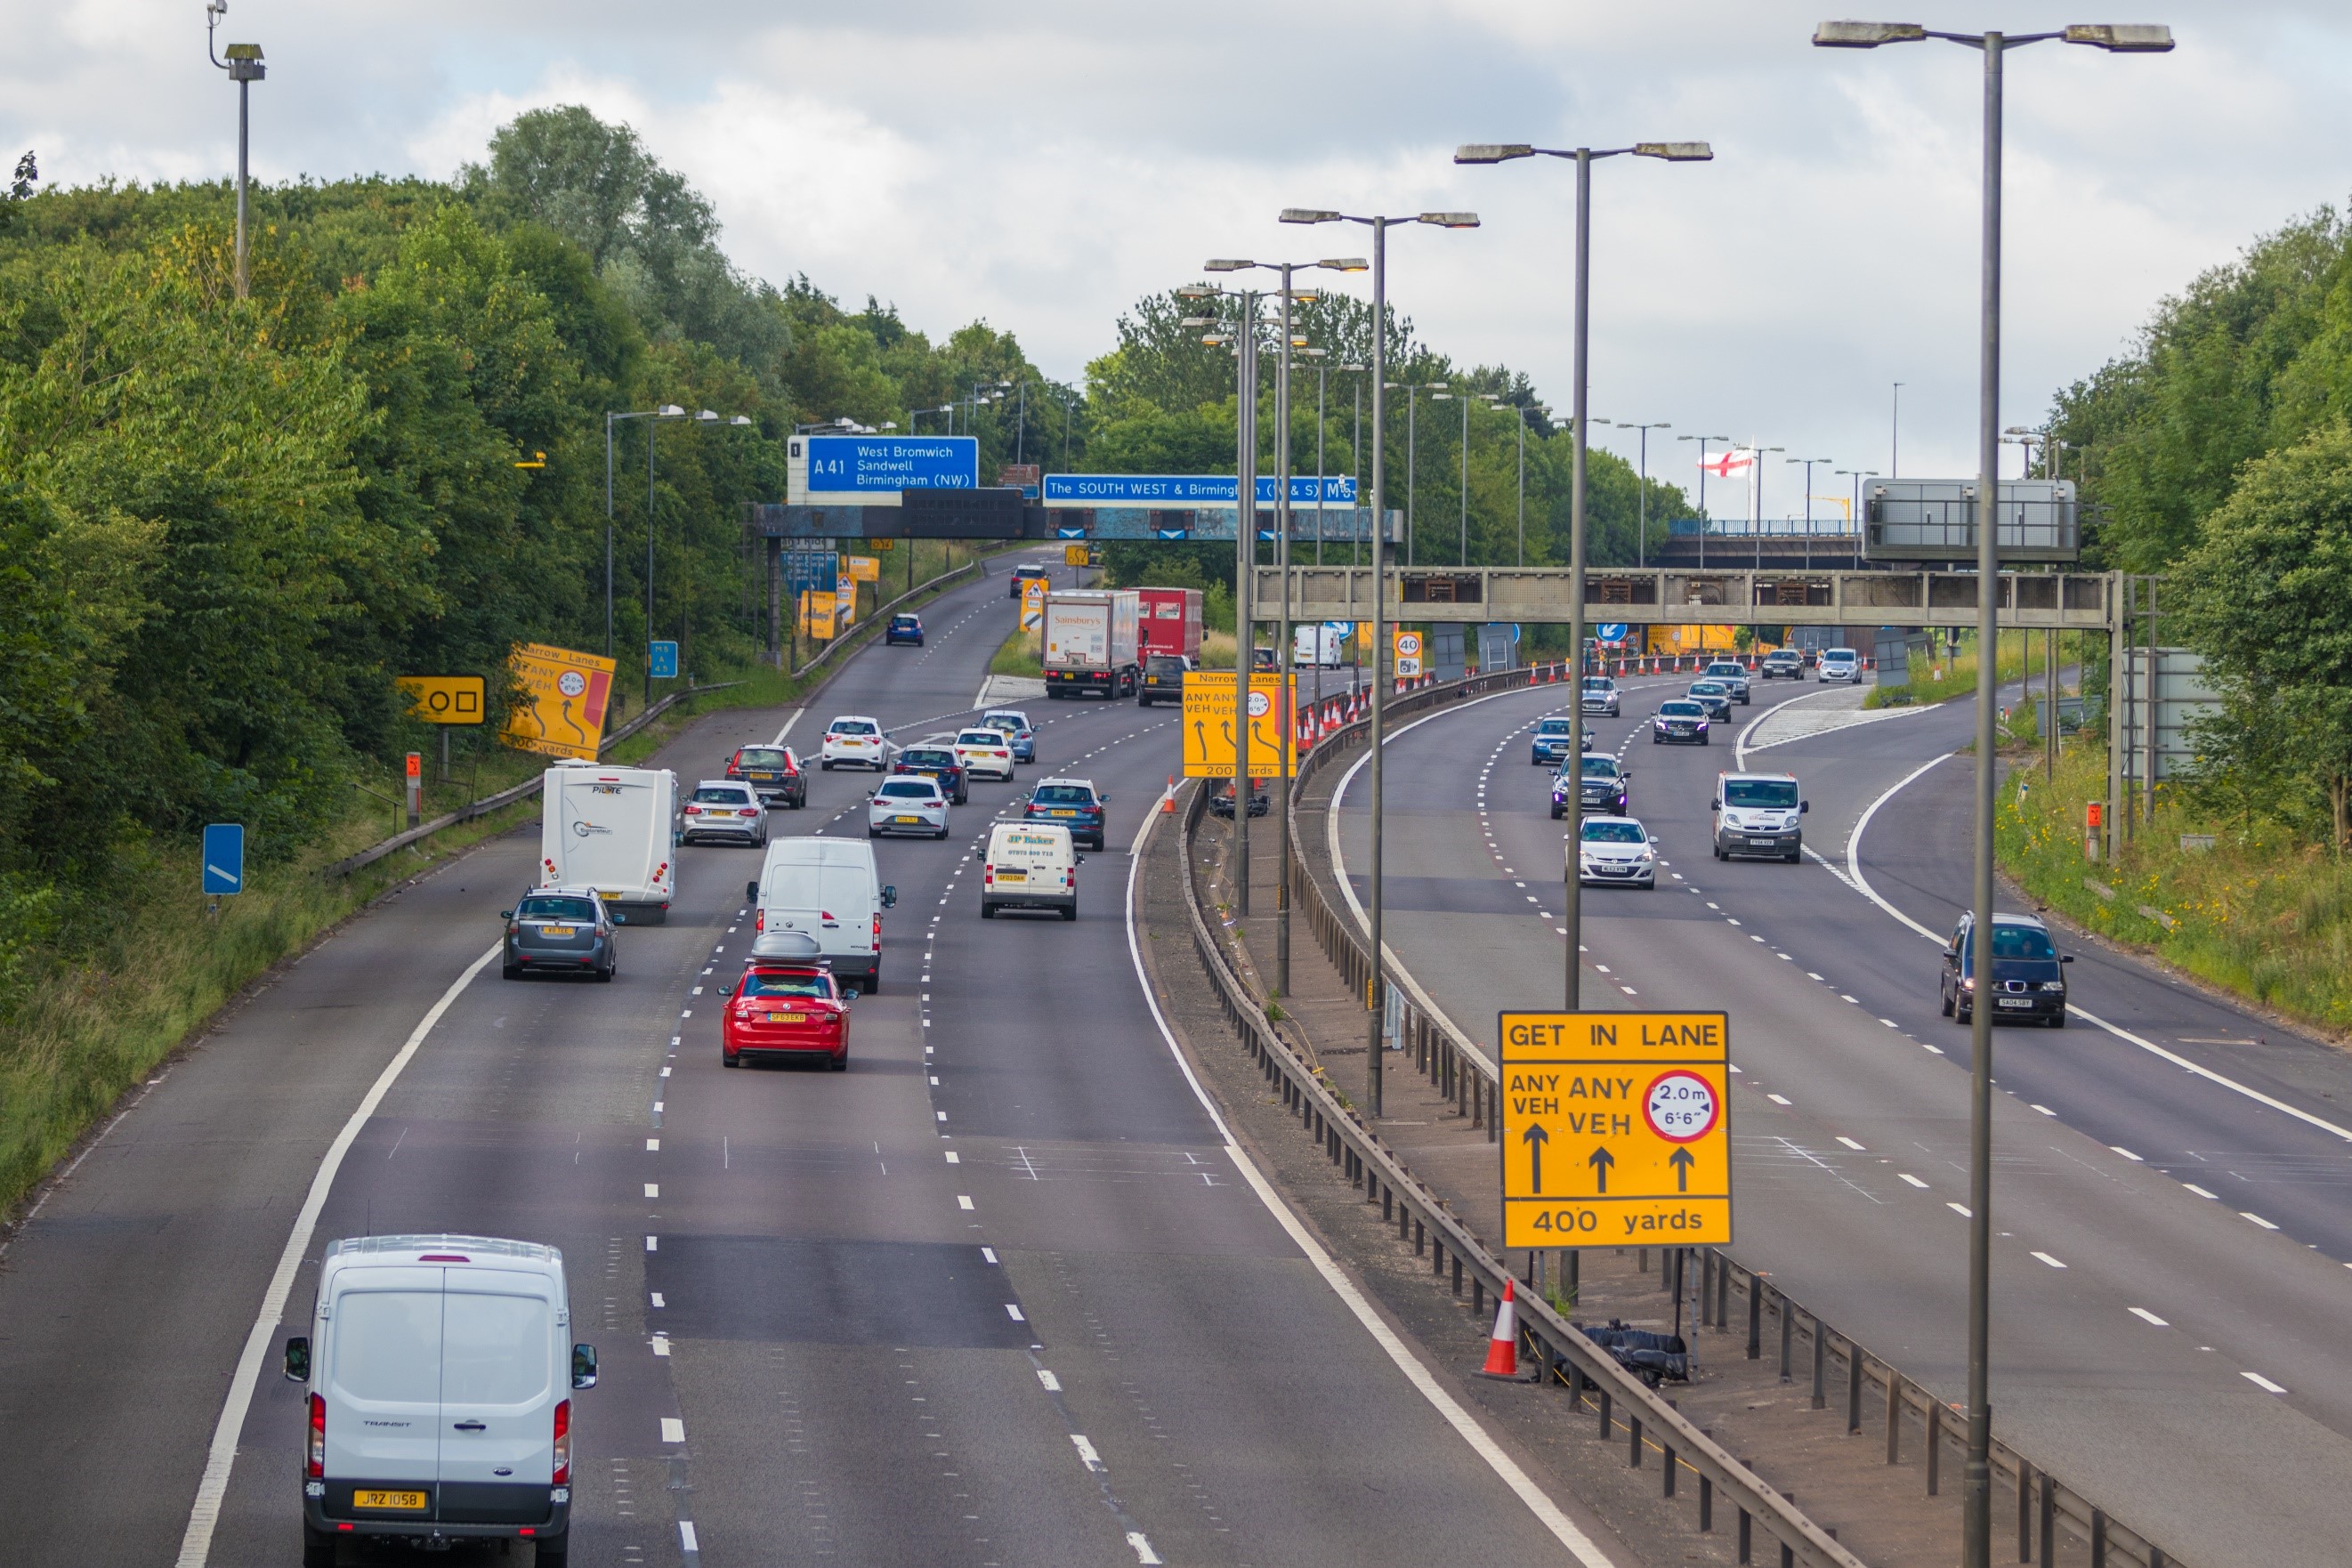 The Most Common Habits of UK Drivers, Revealed